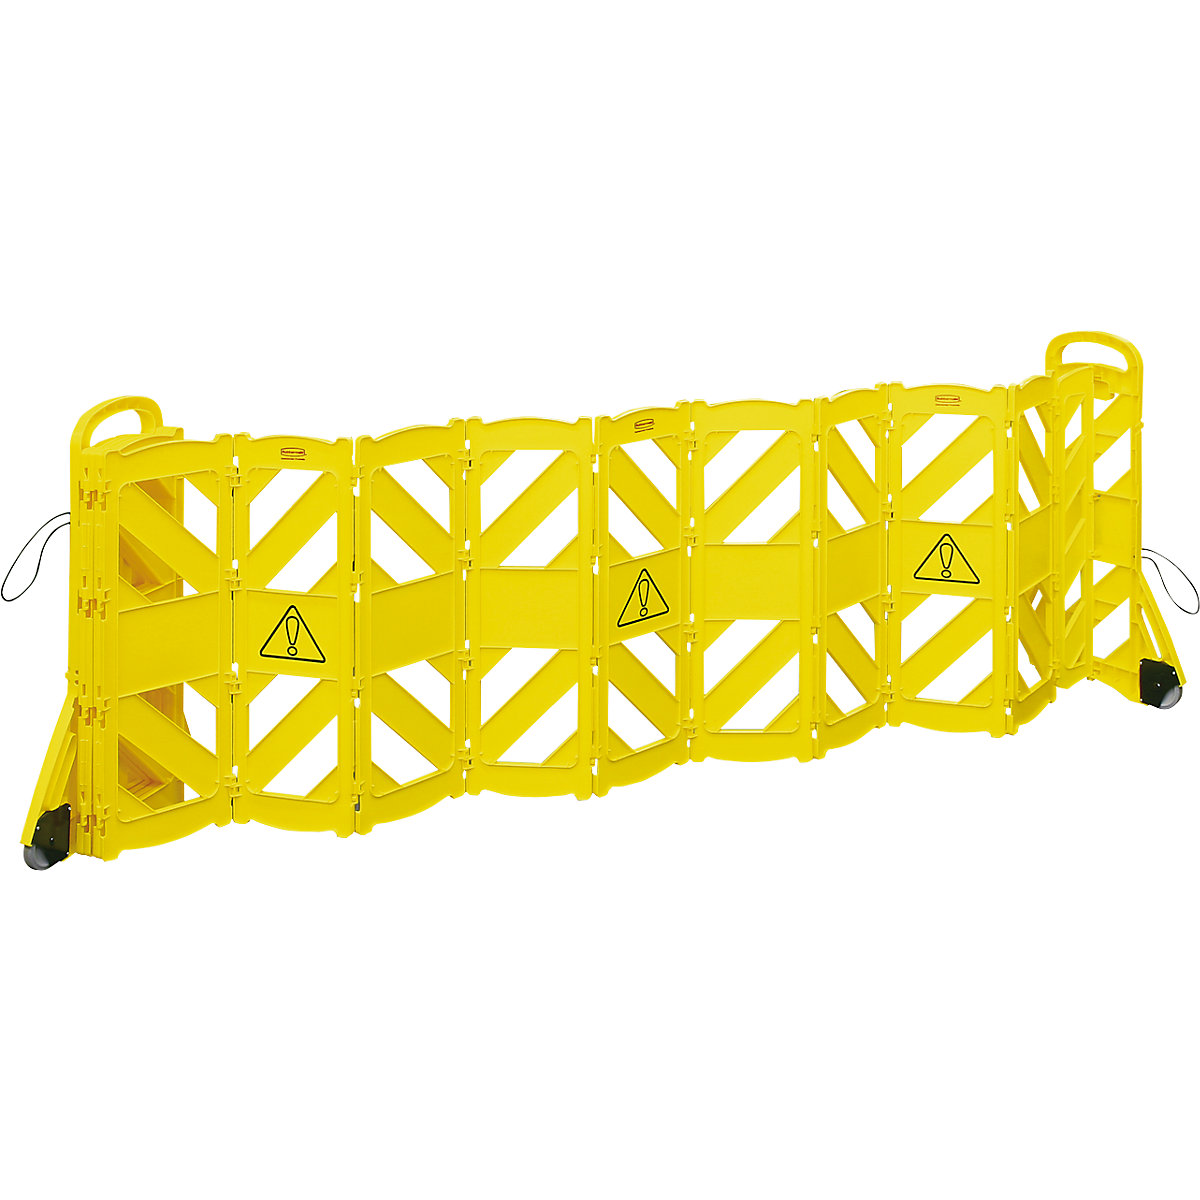 Barrier fence made of polyethylene, mobile - Rubbermaid